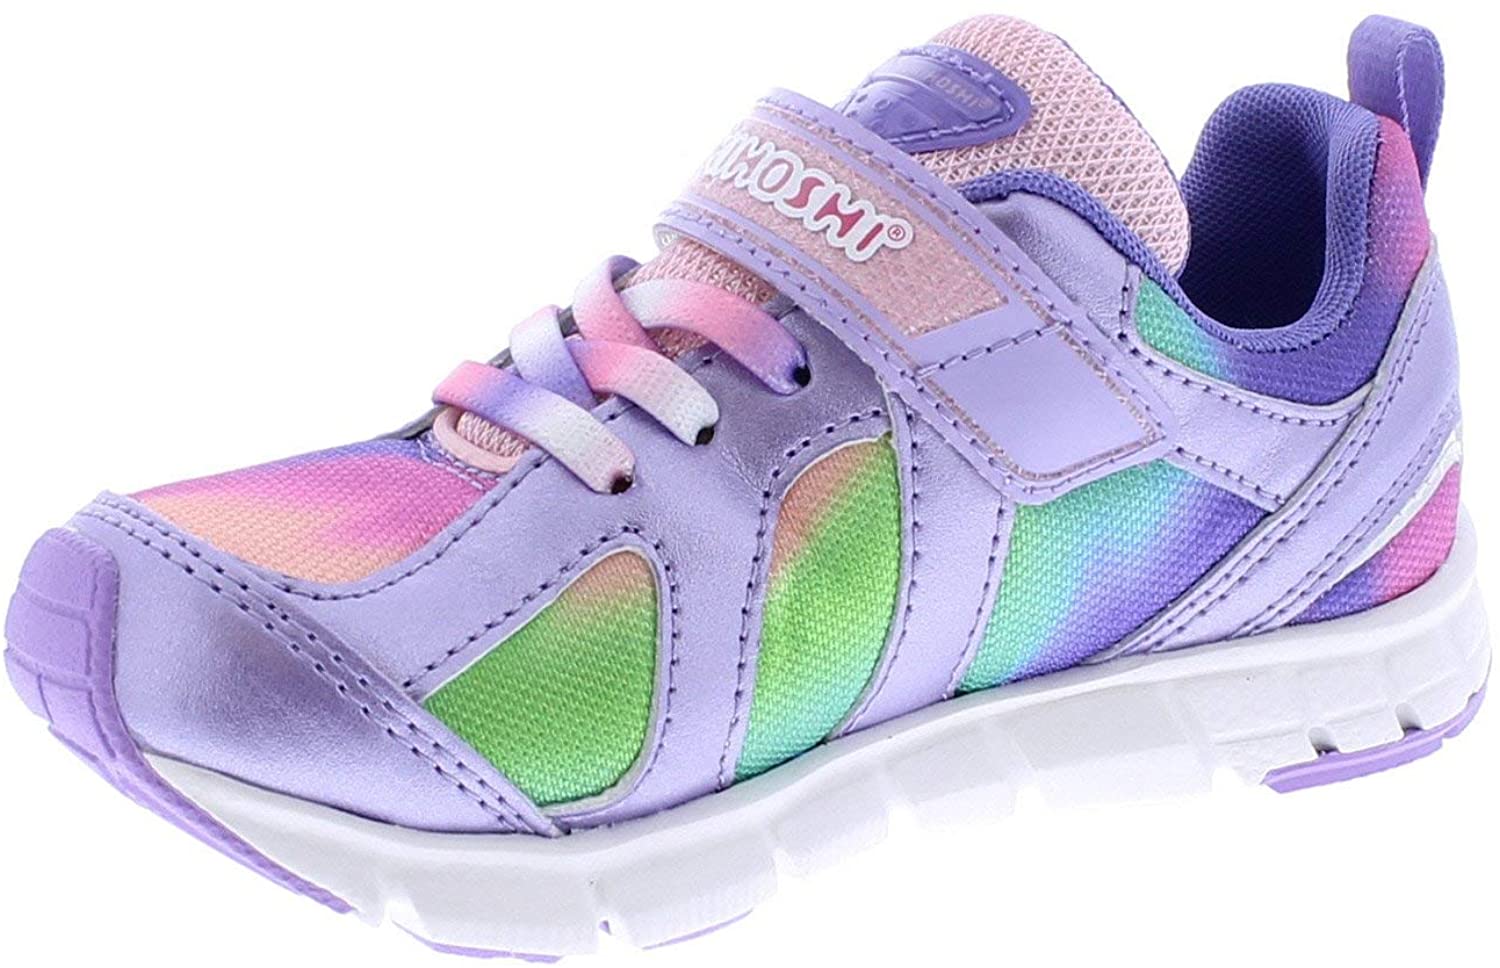 Youth Tsukihoshi Rainbow Sneaker in Lavender/Multi from the front view